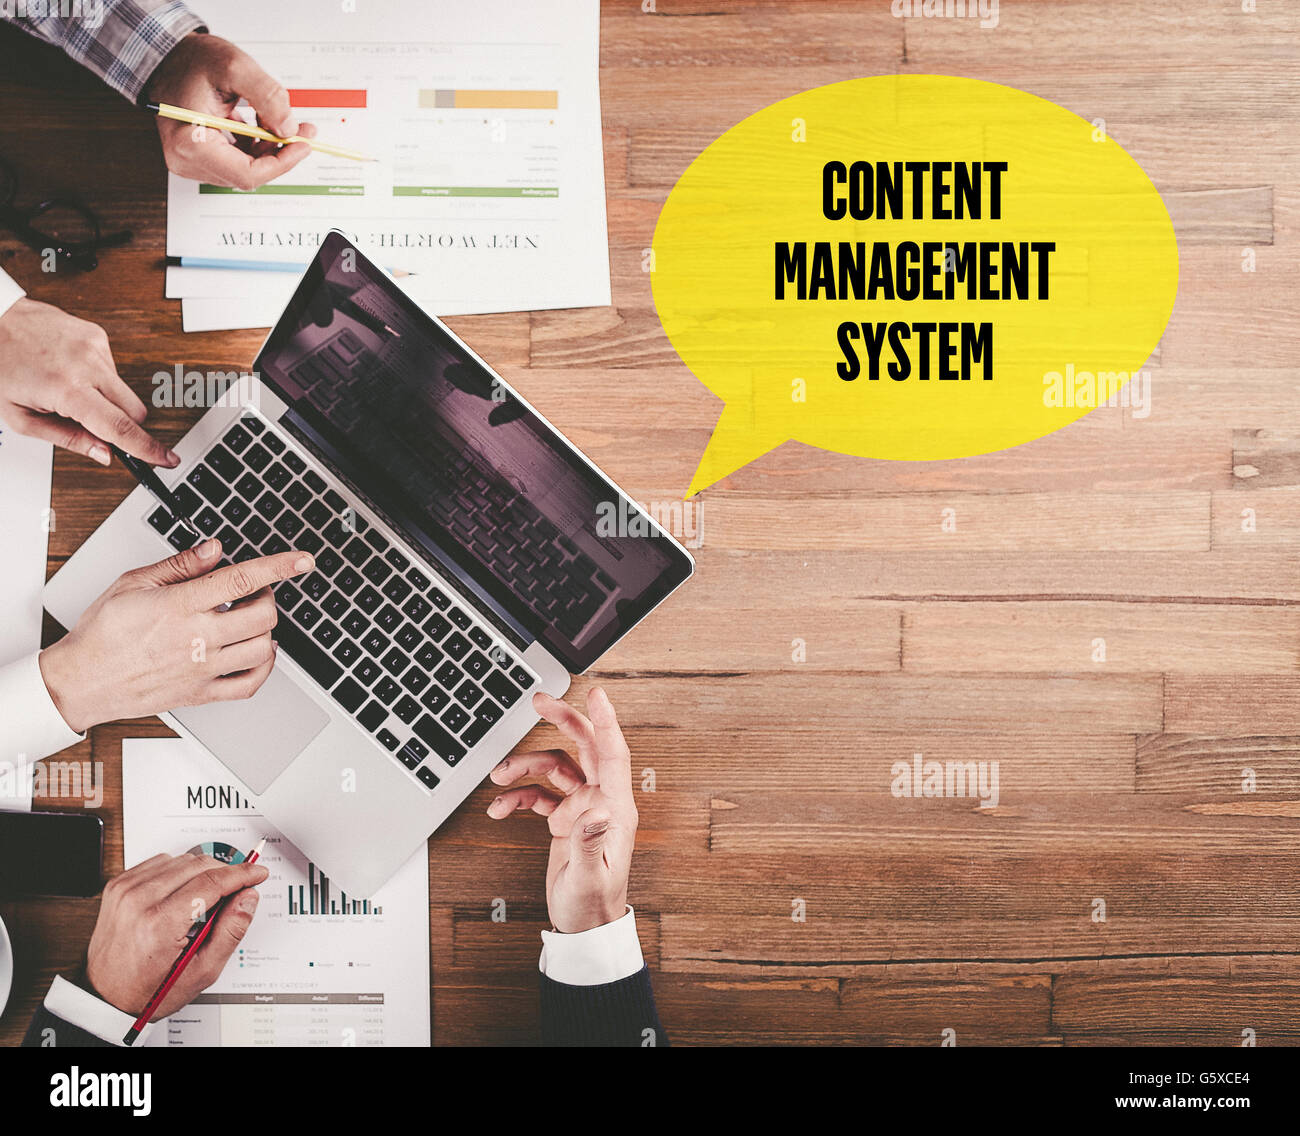 BUSINESS TEAM WORKING IN OFFICE WITH CONTENT MANAGEMENT SYSTEM SPEECH BUBBLE ON DESK Stock Photo